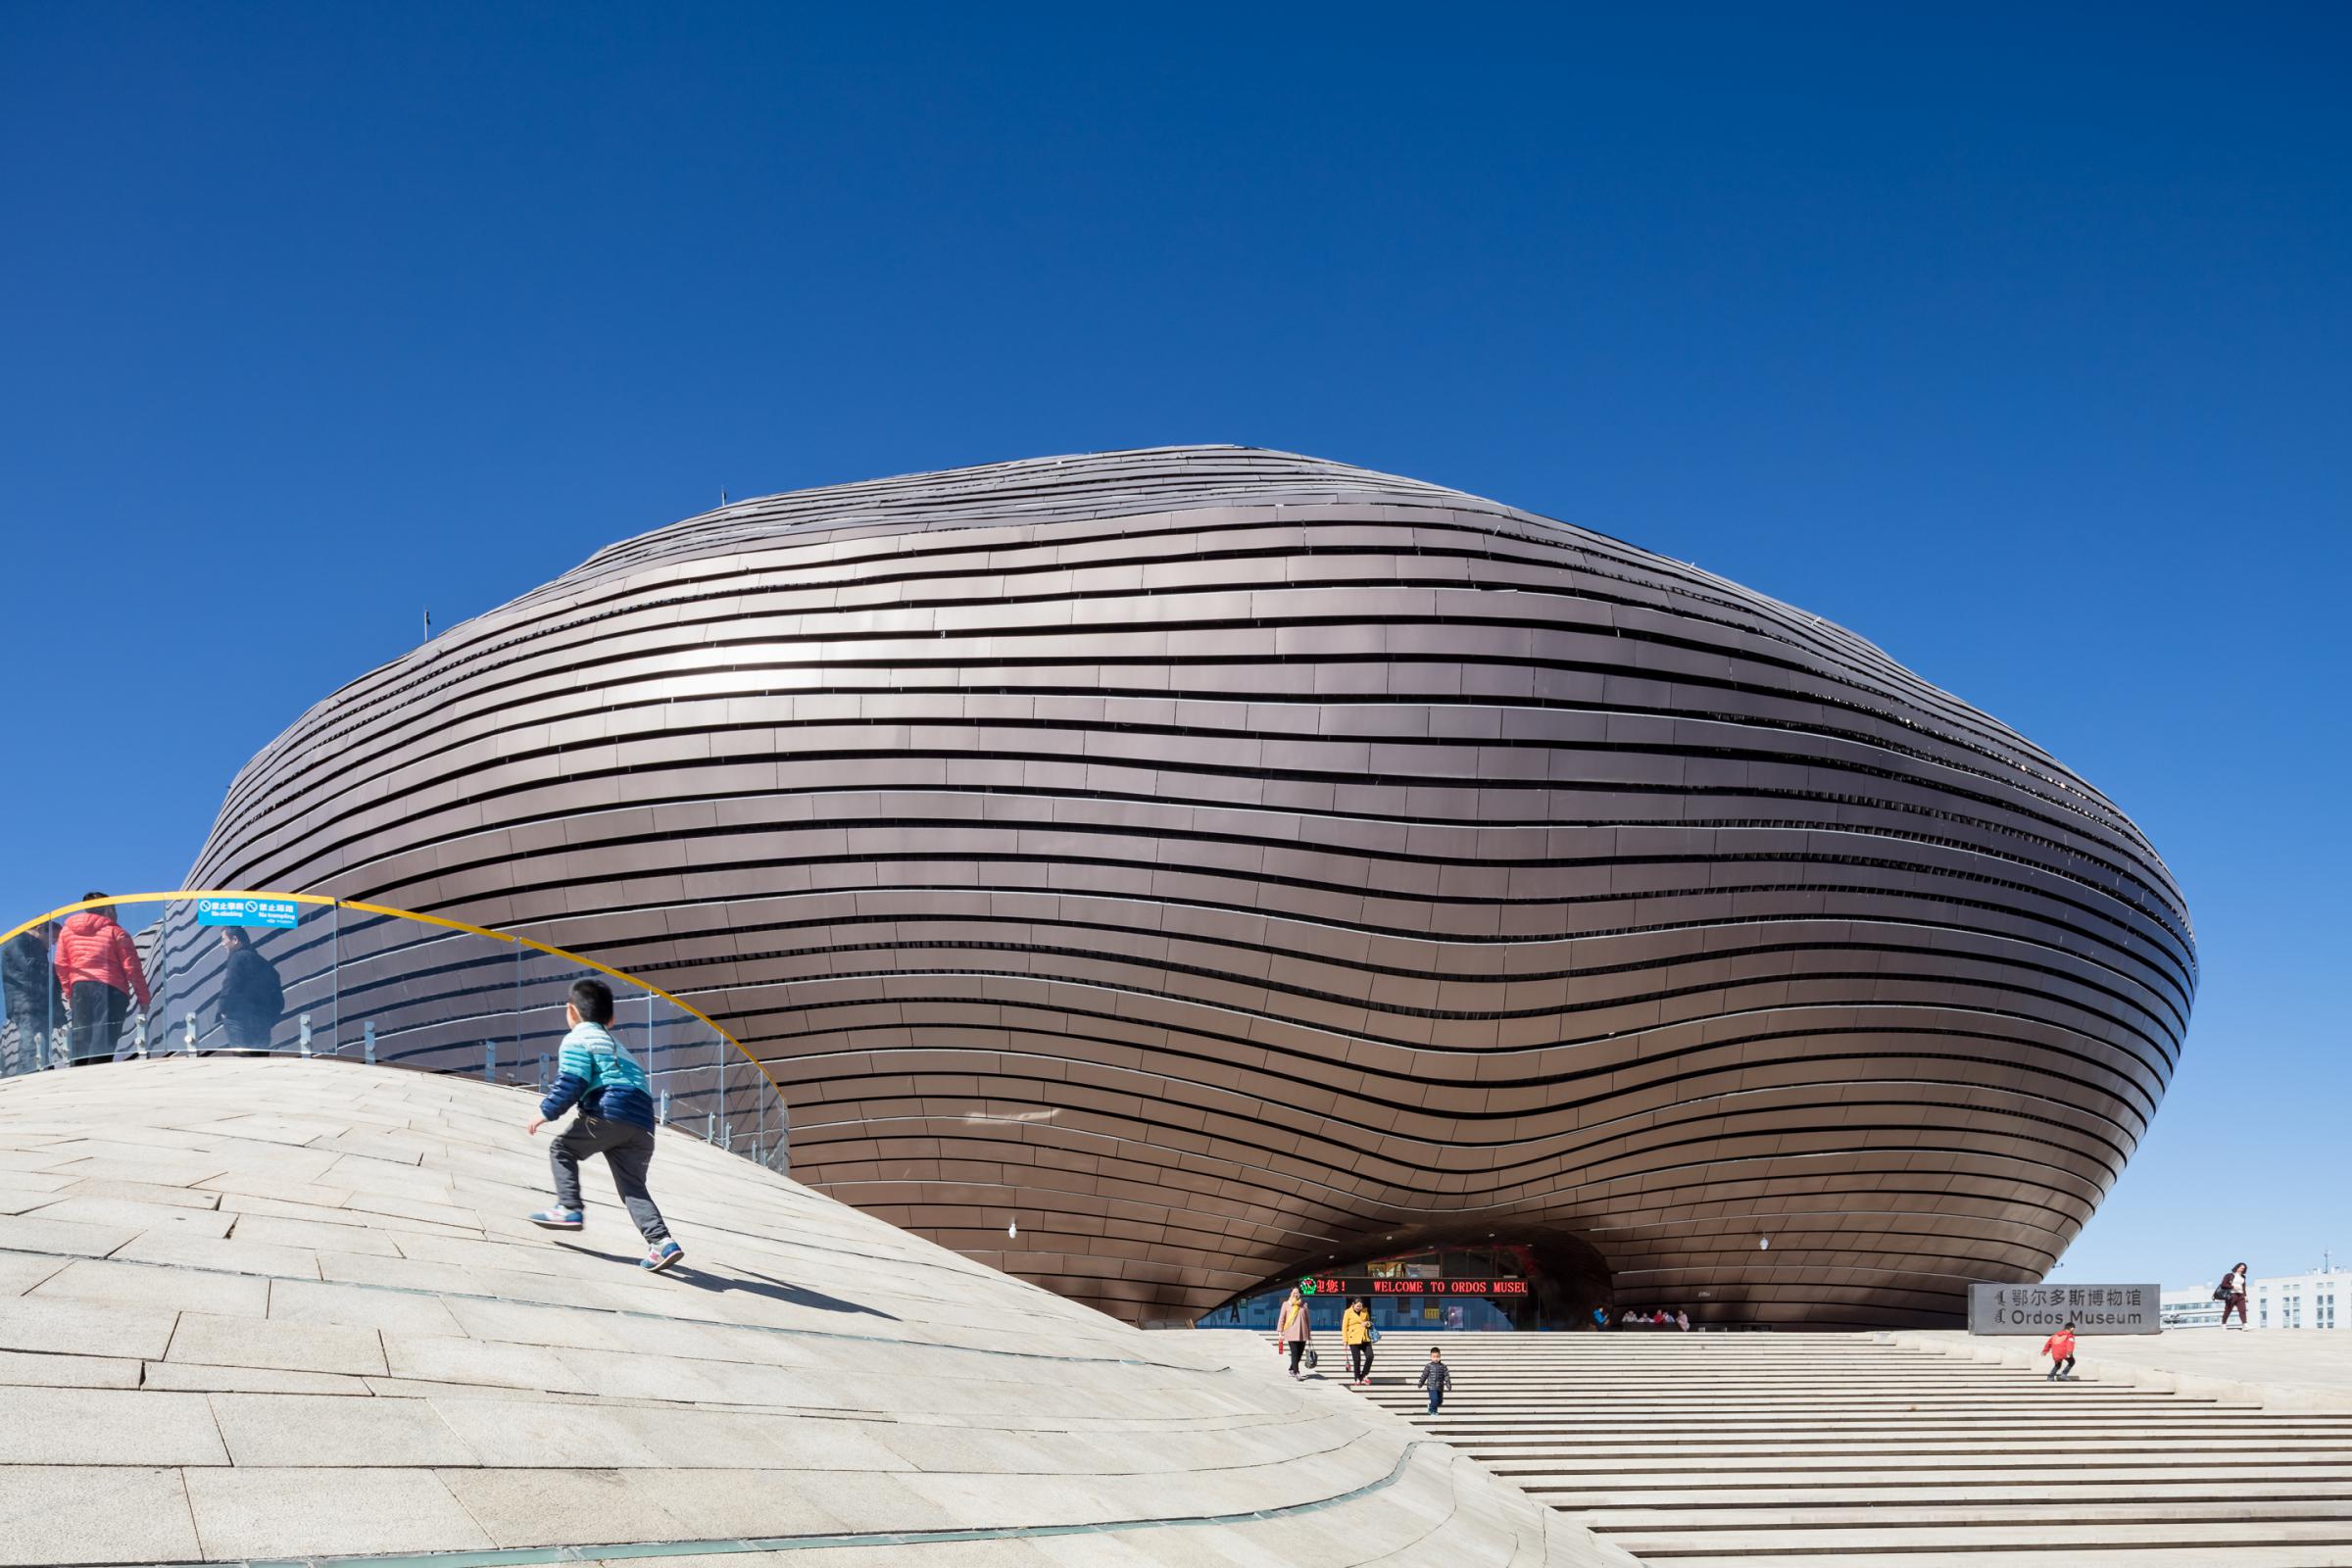 Photograph of Ordos Museum, designed by MAD Architects and located in Ordos, China